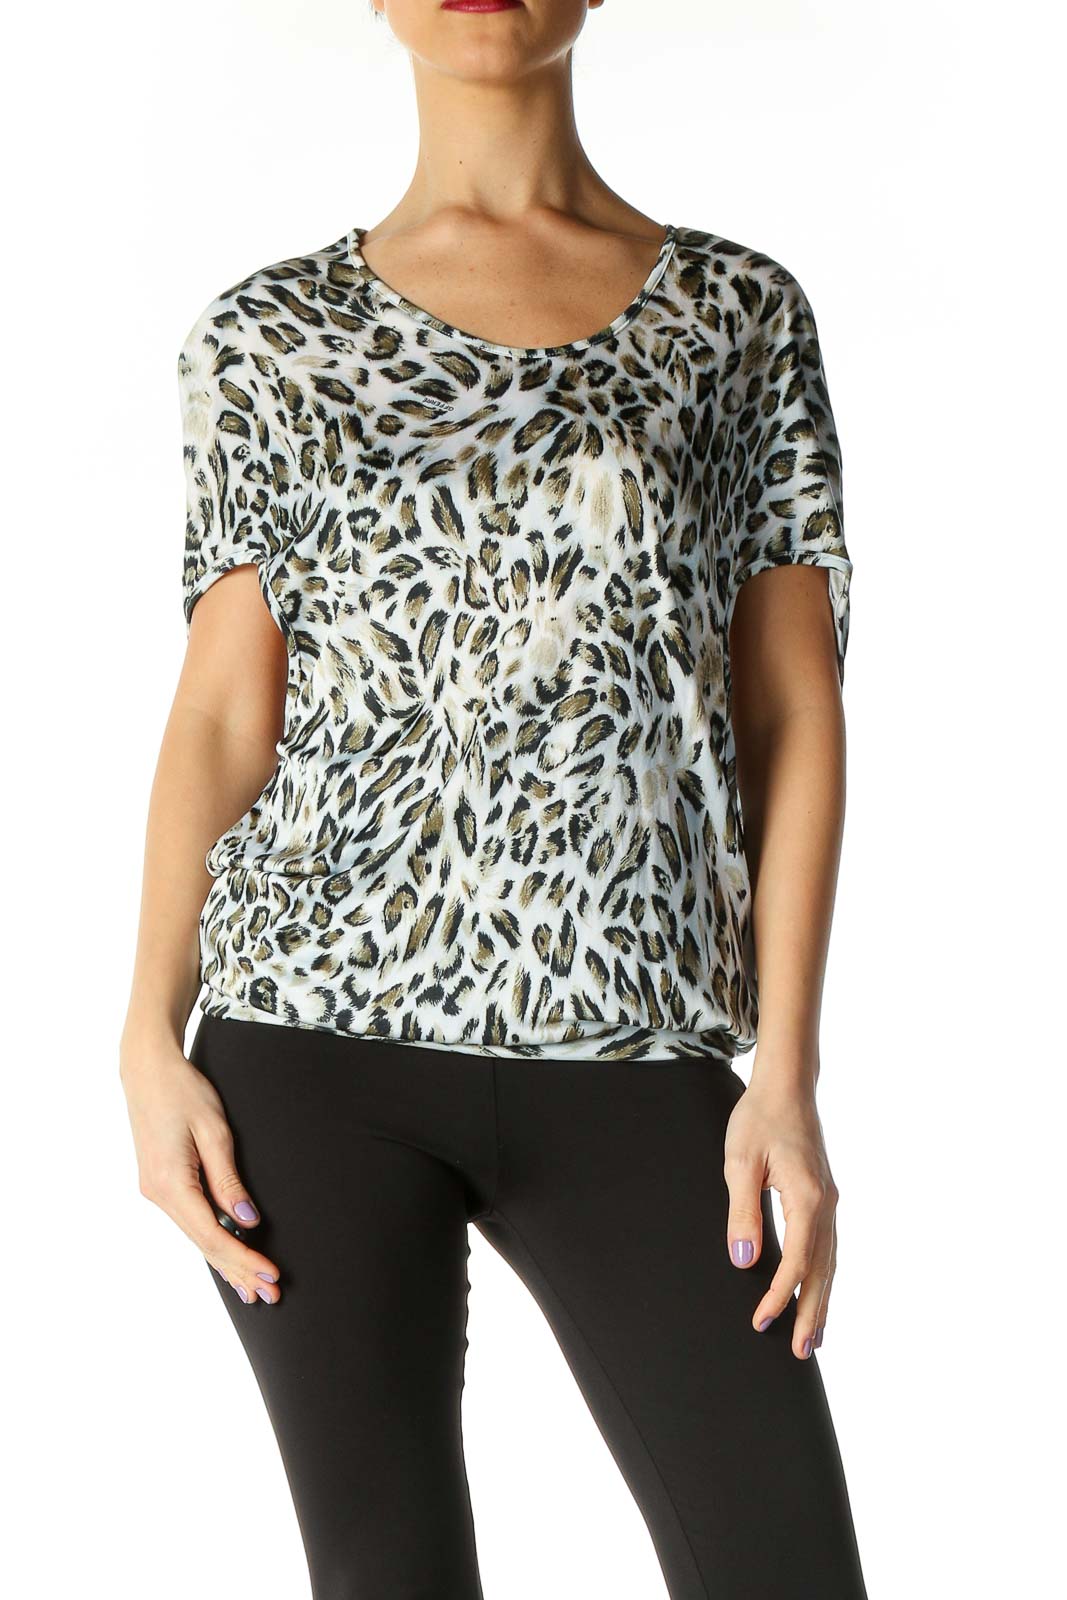 Beige Animal Print Casual Blouse Front